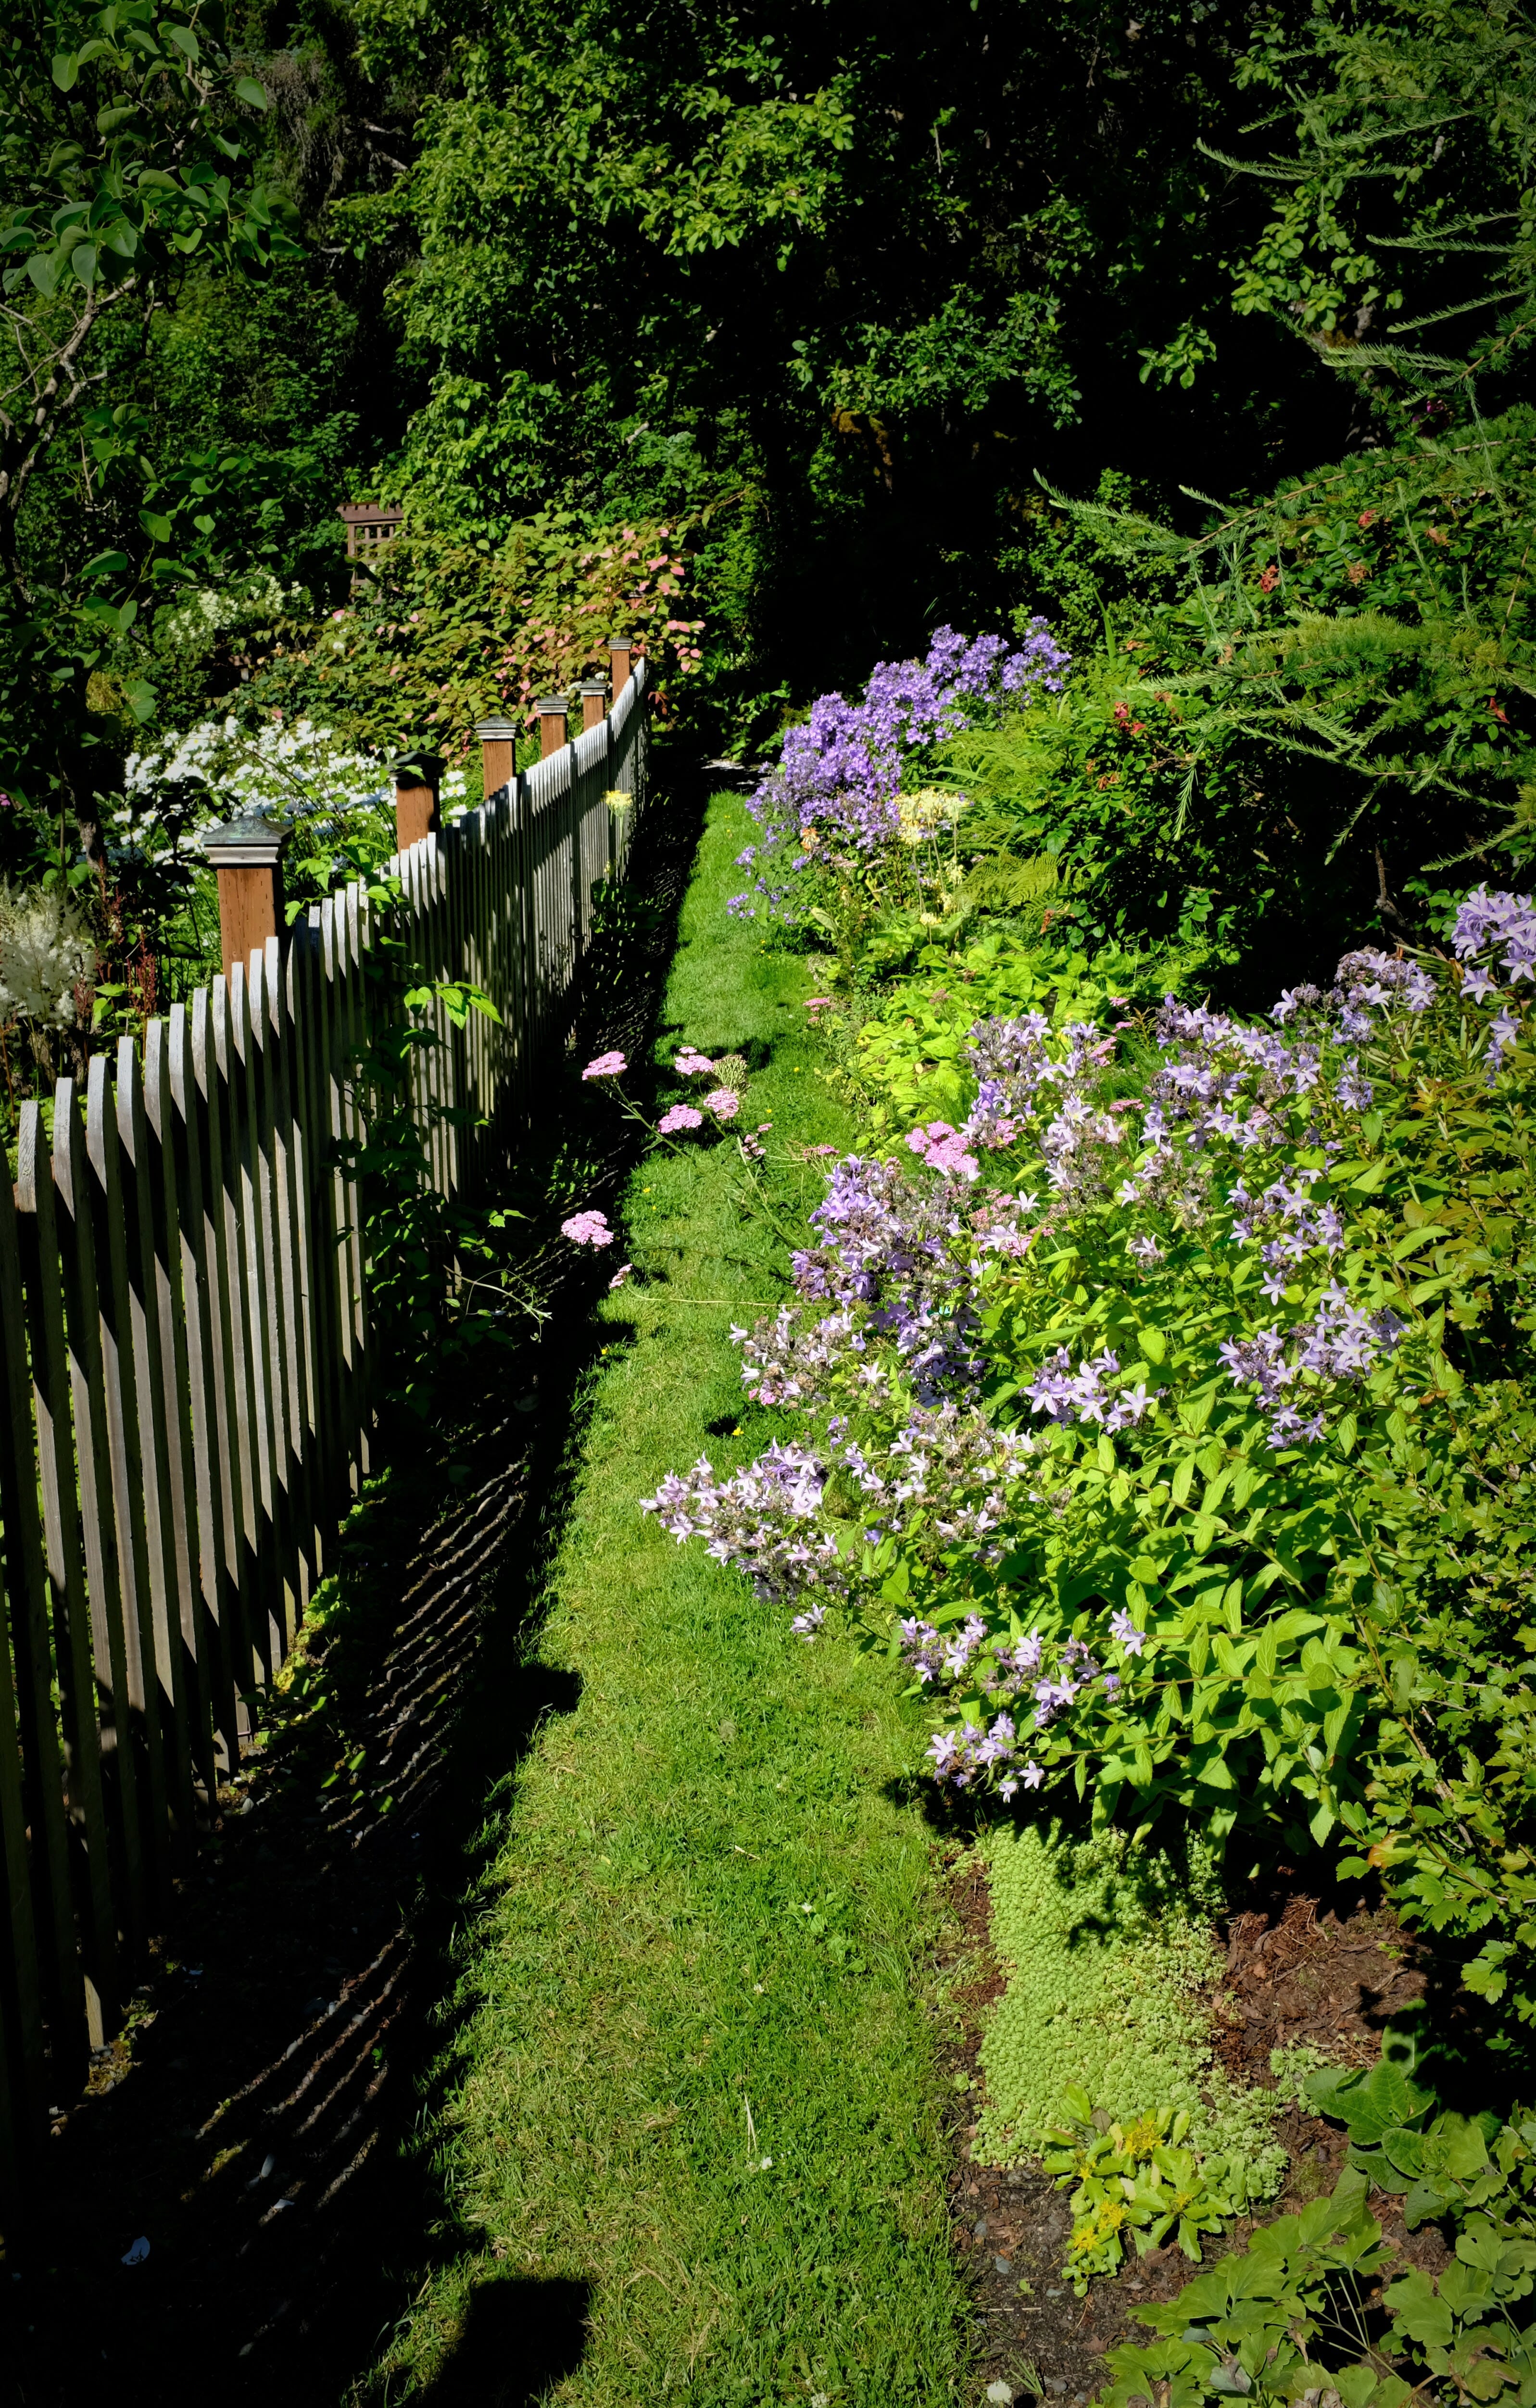 Fence with spring blooms at the arboretum.